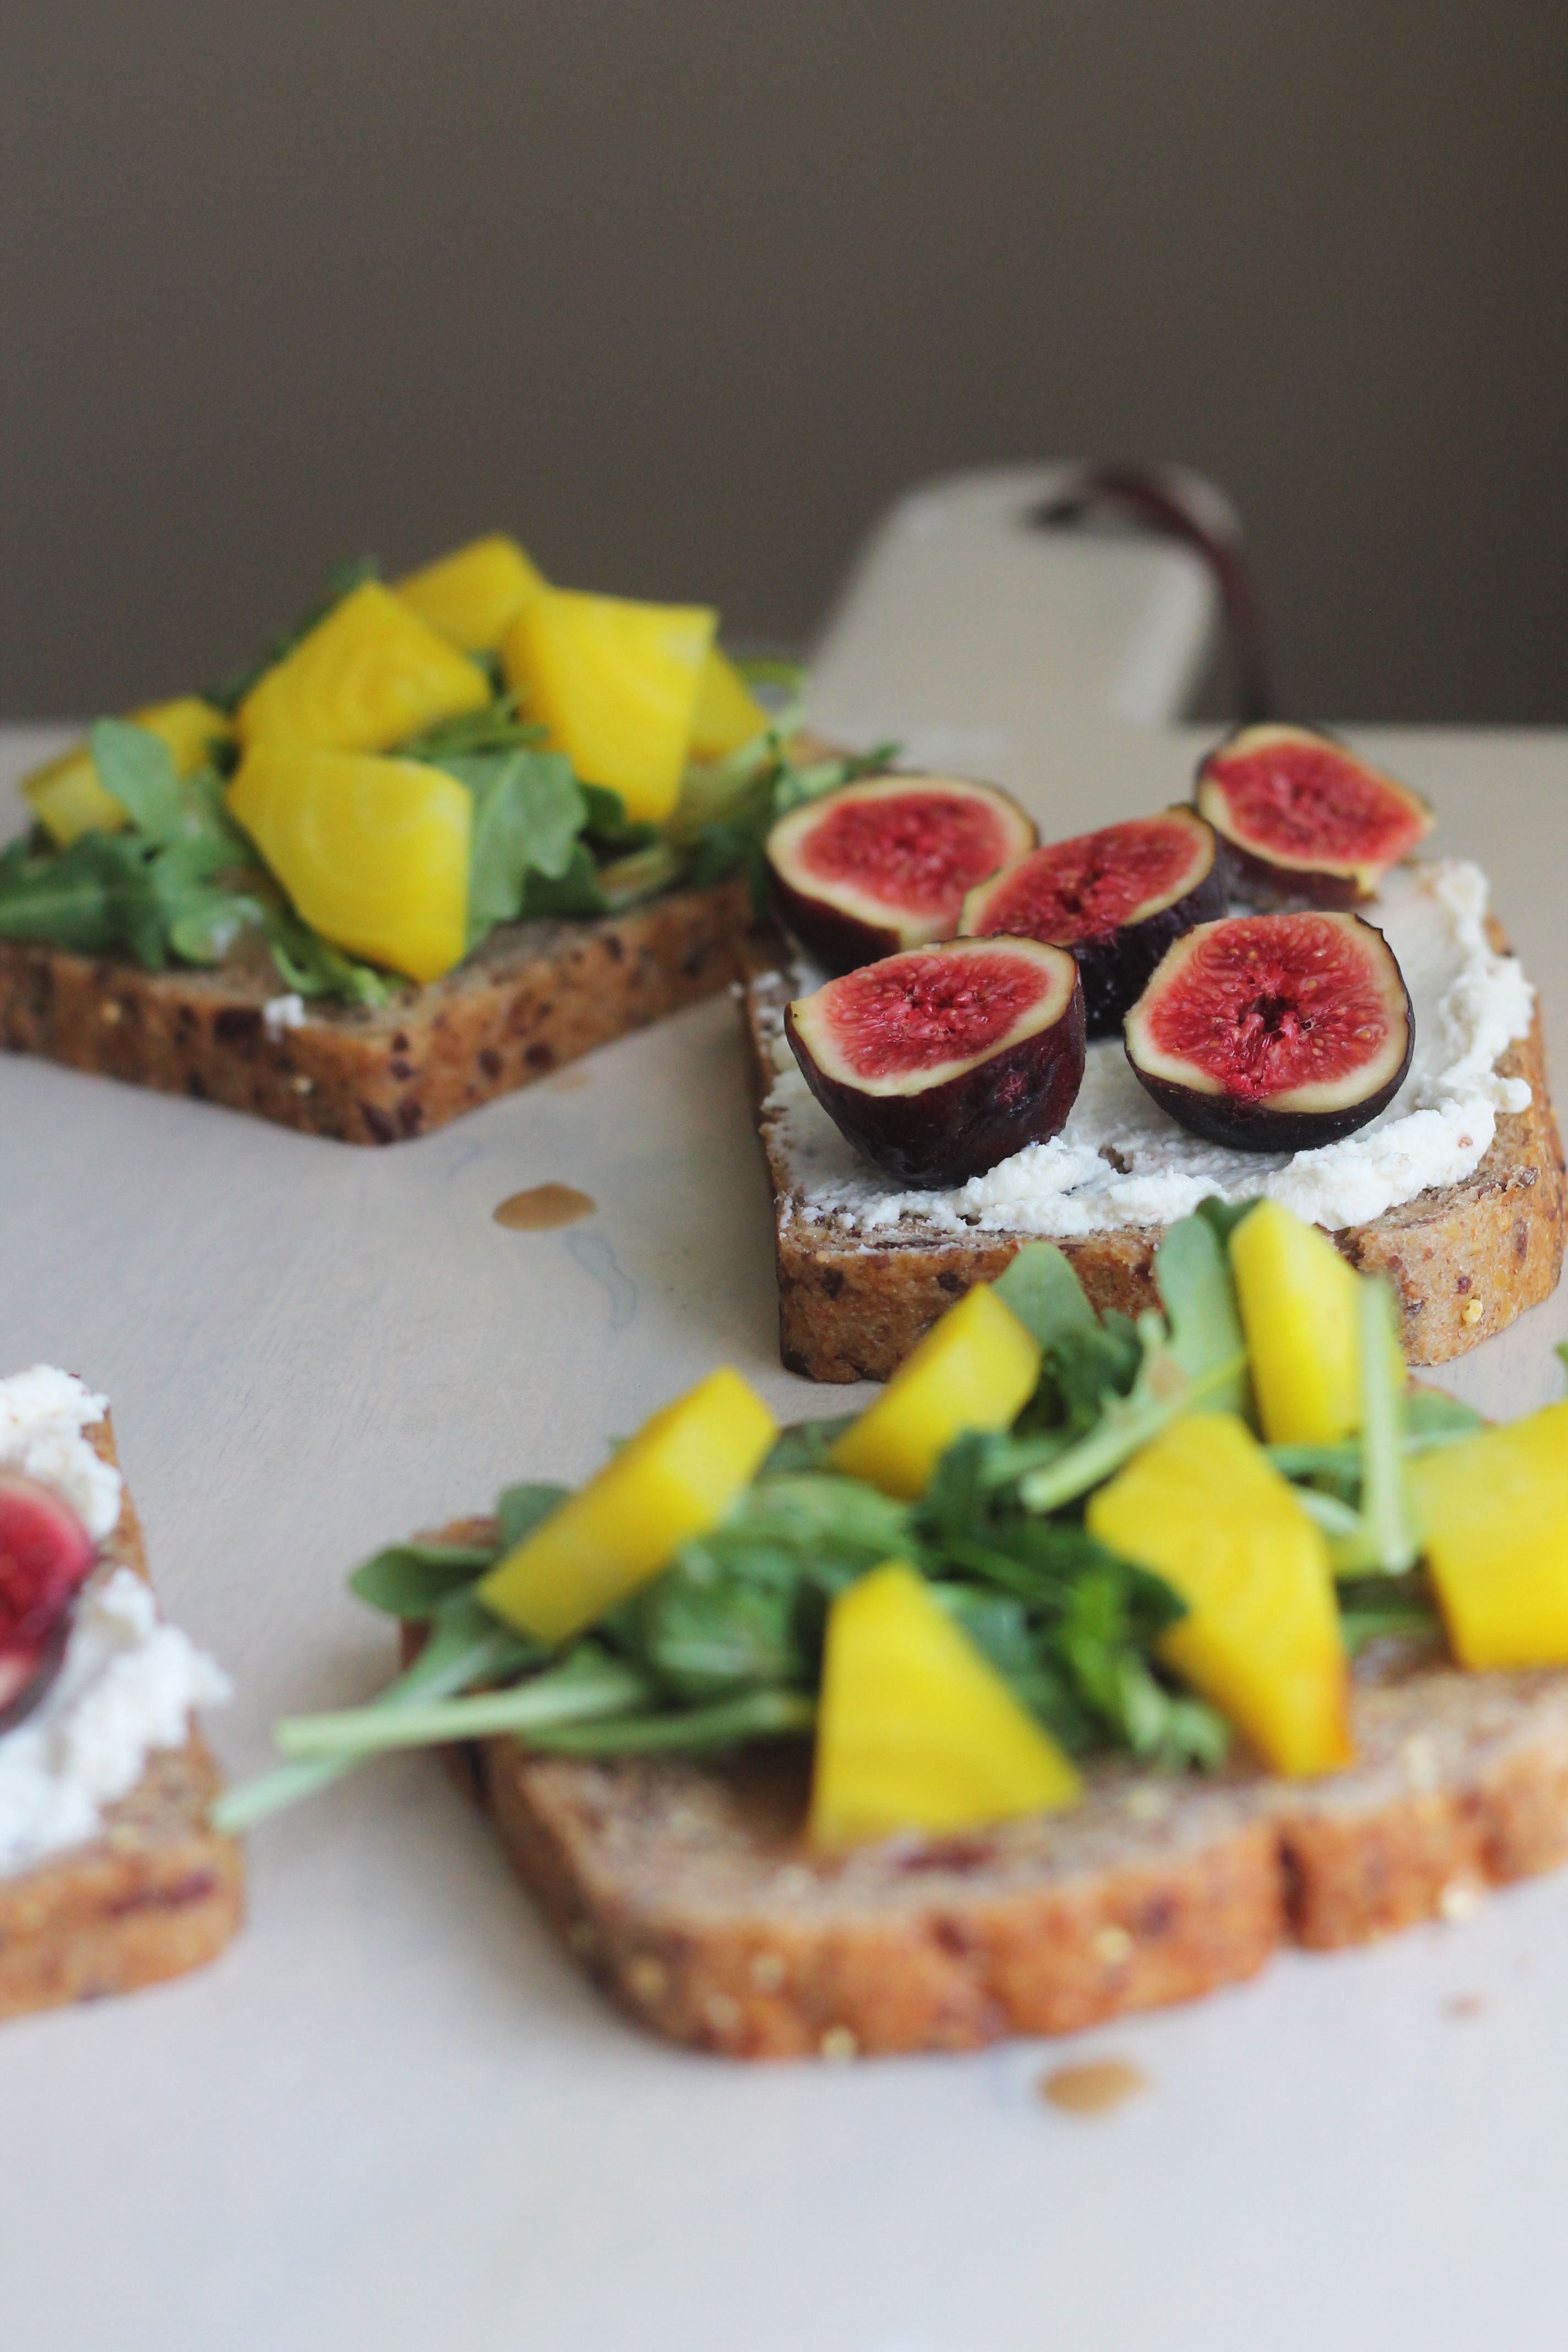 Meet your new favorite sandwich - Beet, Figs, and Goat Cheese